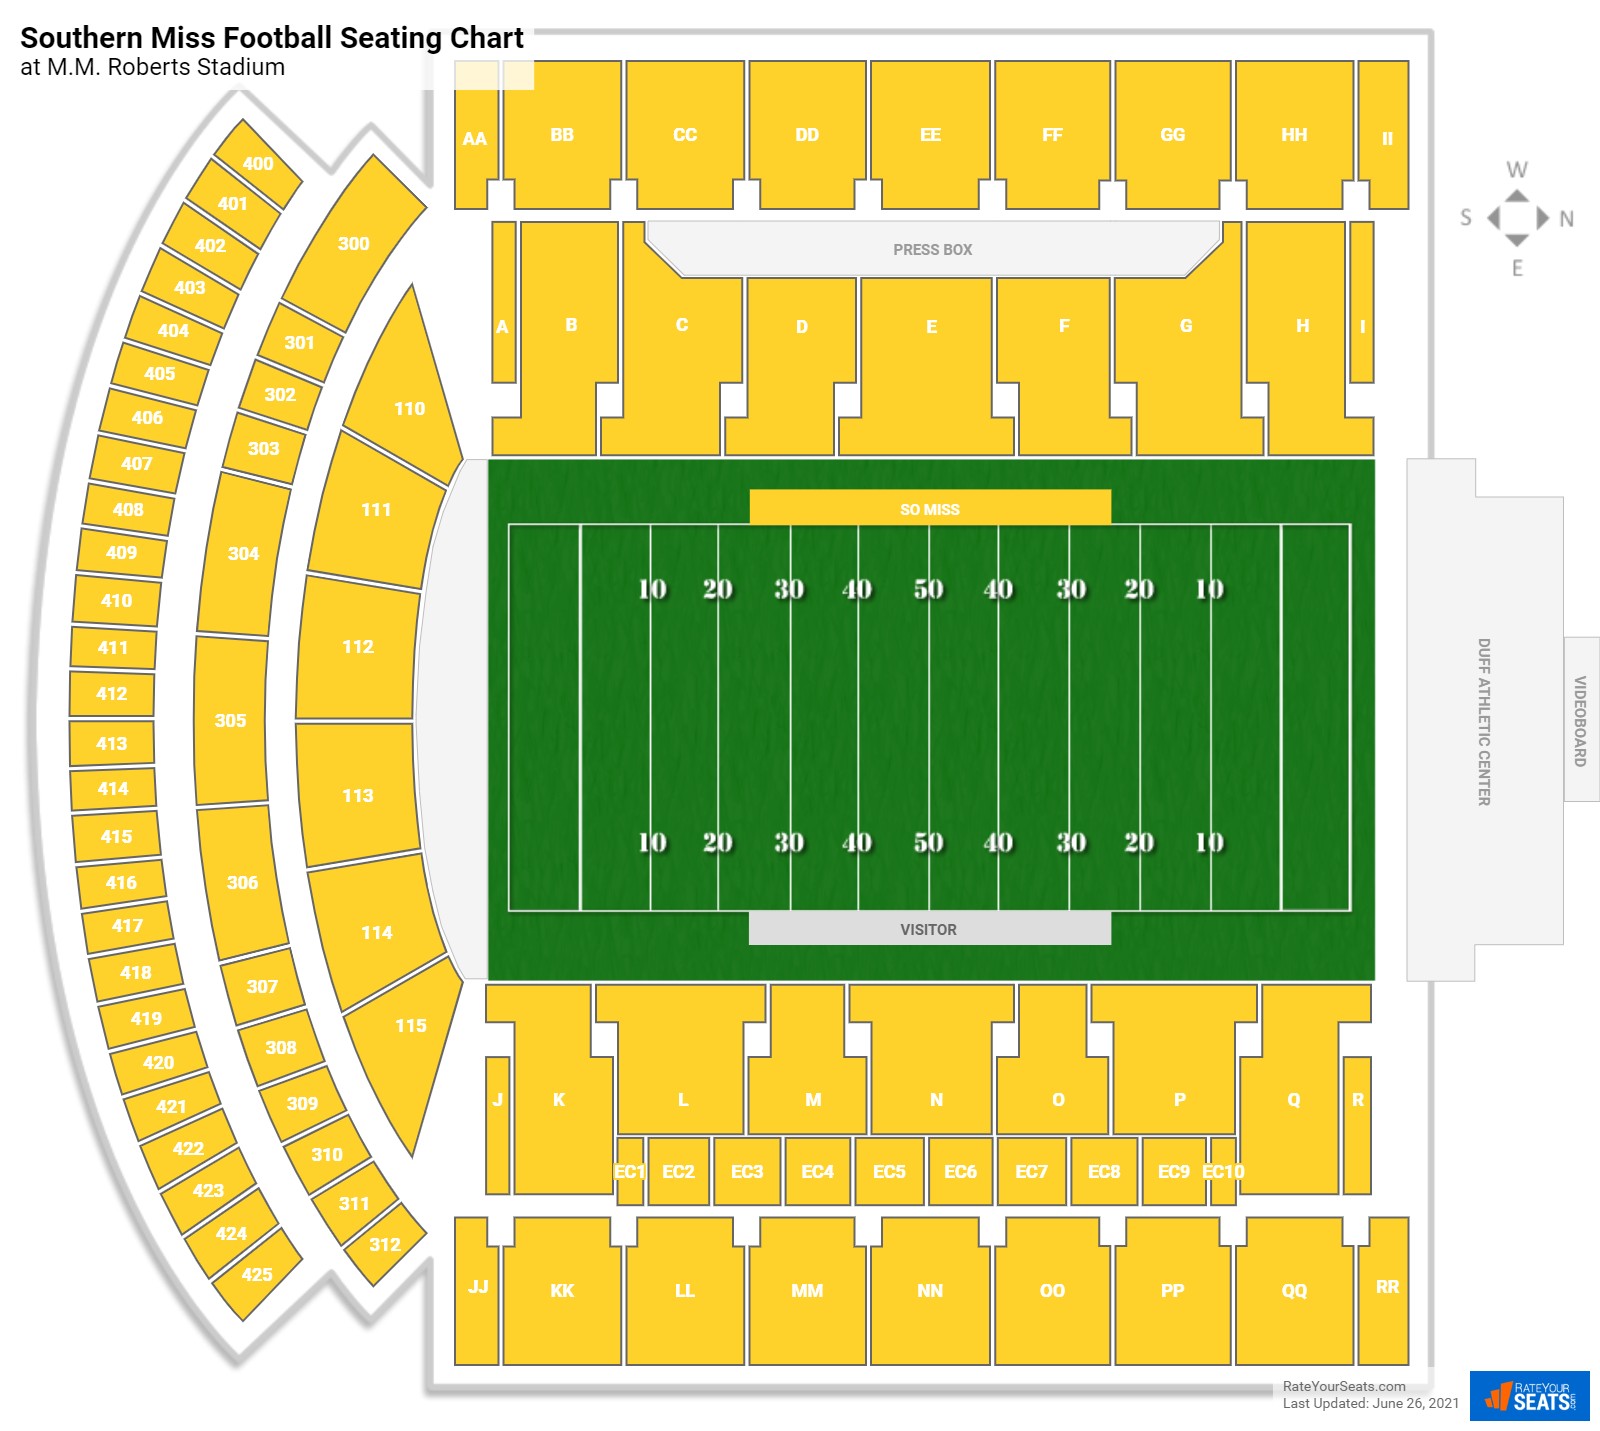 Southern Mississippi Golden Eagles Seating Chart at M.M. Roberts Stadium